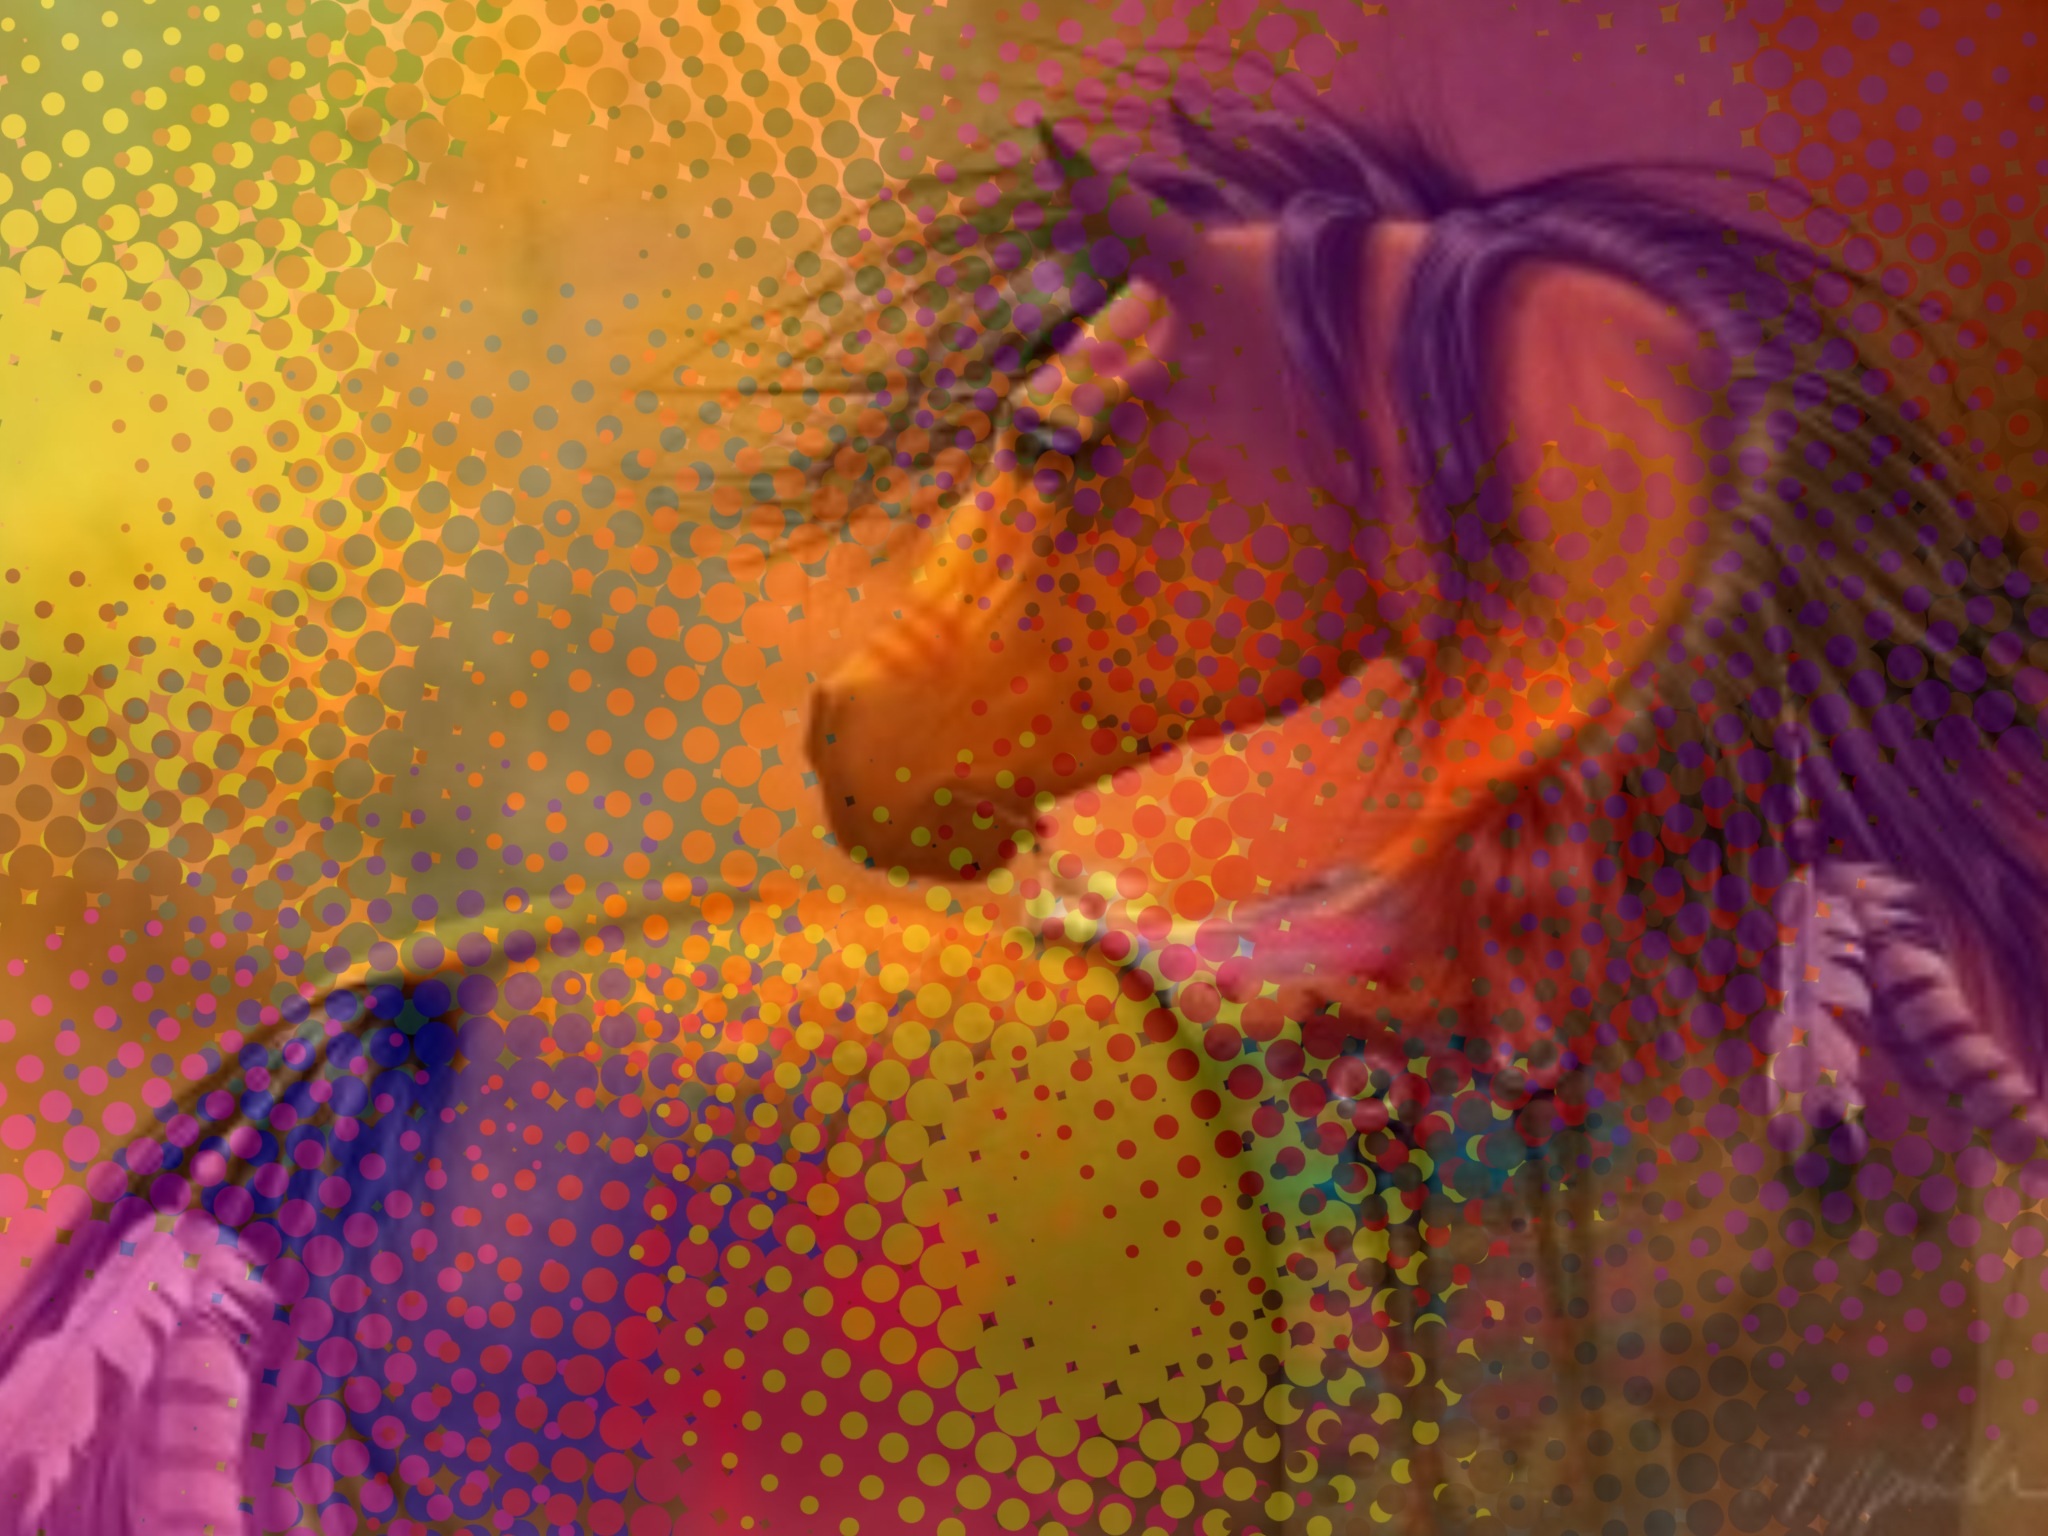 Cool Indian Horse - Horses Wallpaper (34245156) - Fanpop - Page 8